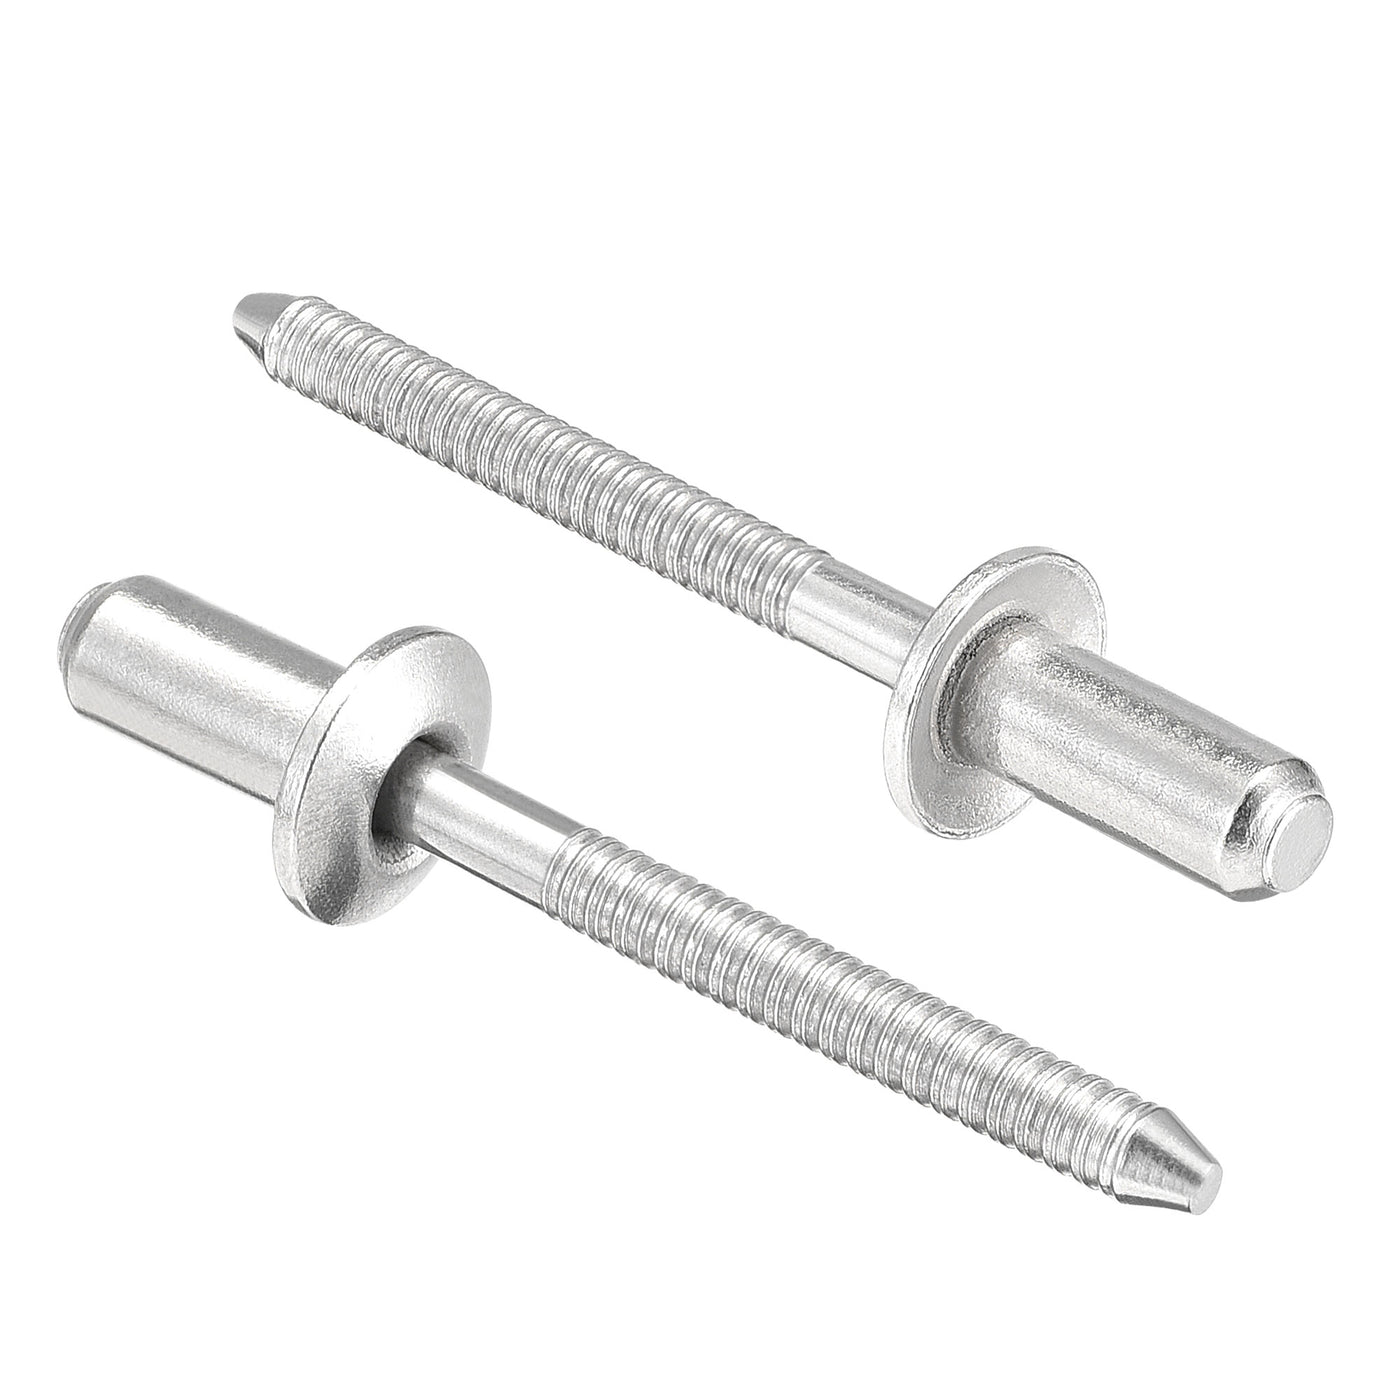 uxcell Uxcell Blind Rivets 304 Stainless Steel 4.8mm Diameter 11mm Grip Length 100pcs